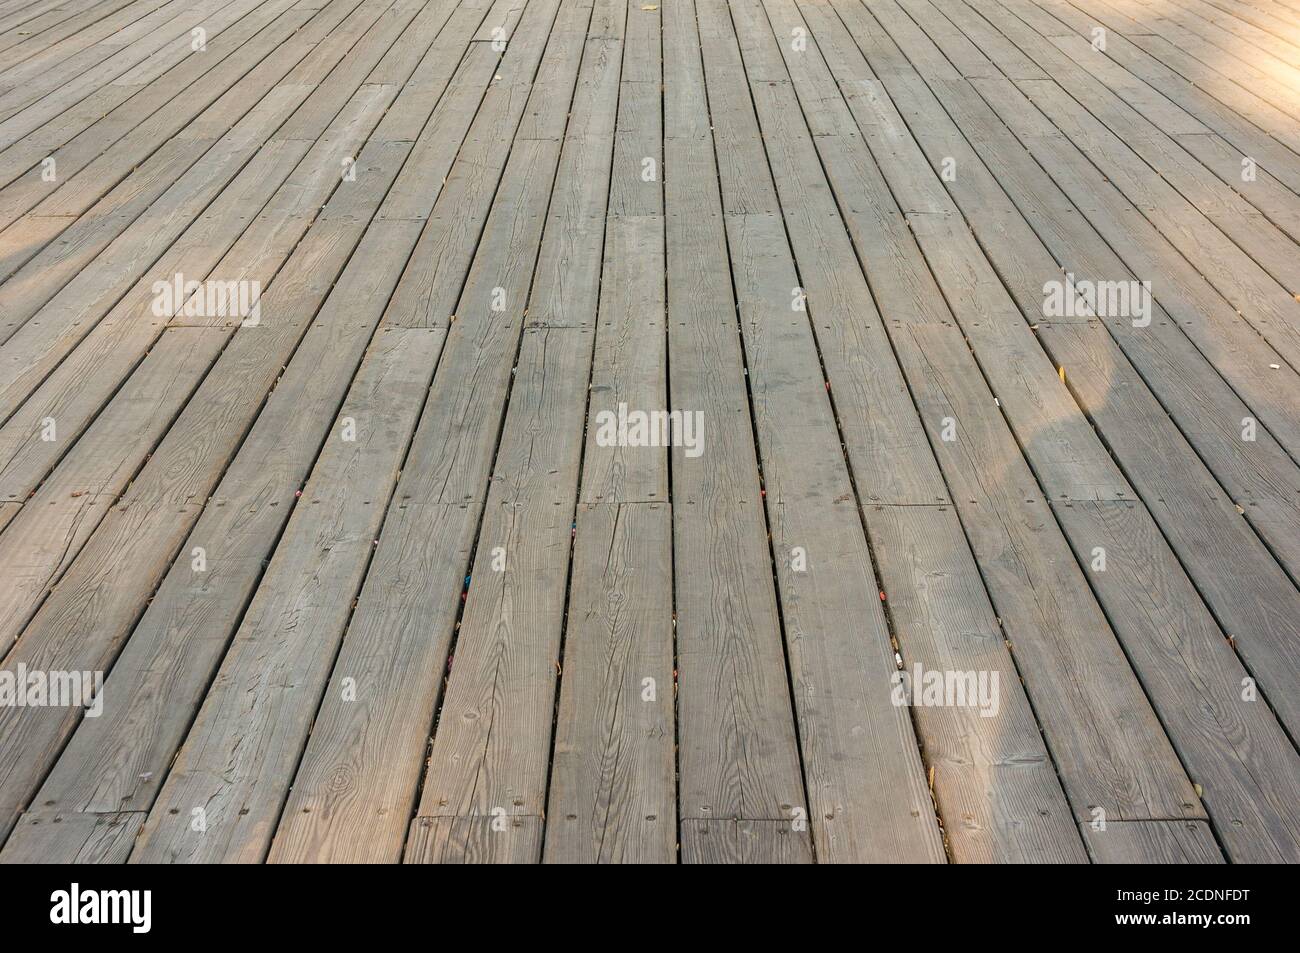 Old wood deck Stock Photo